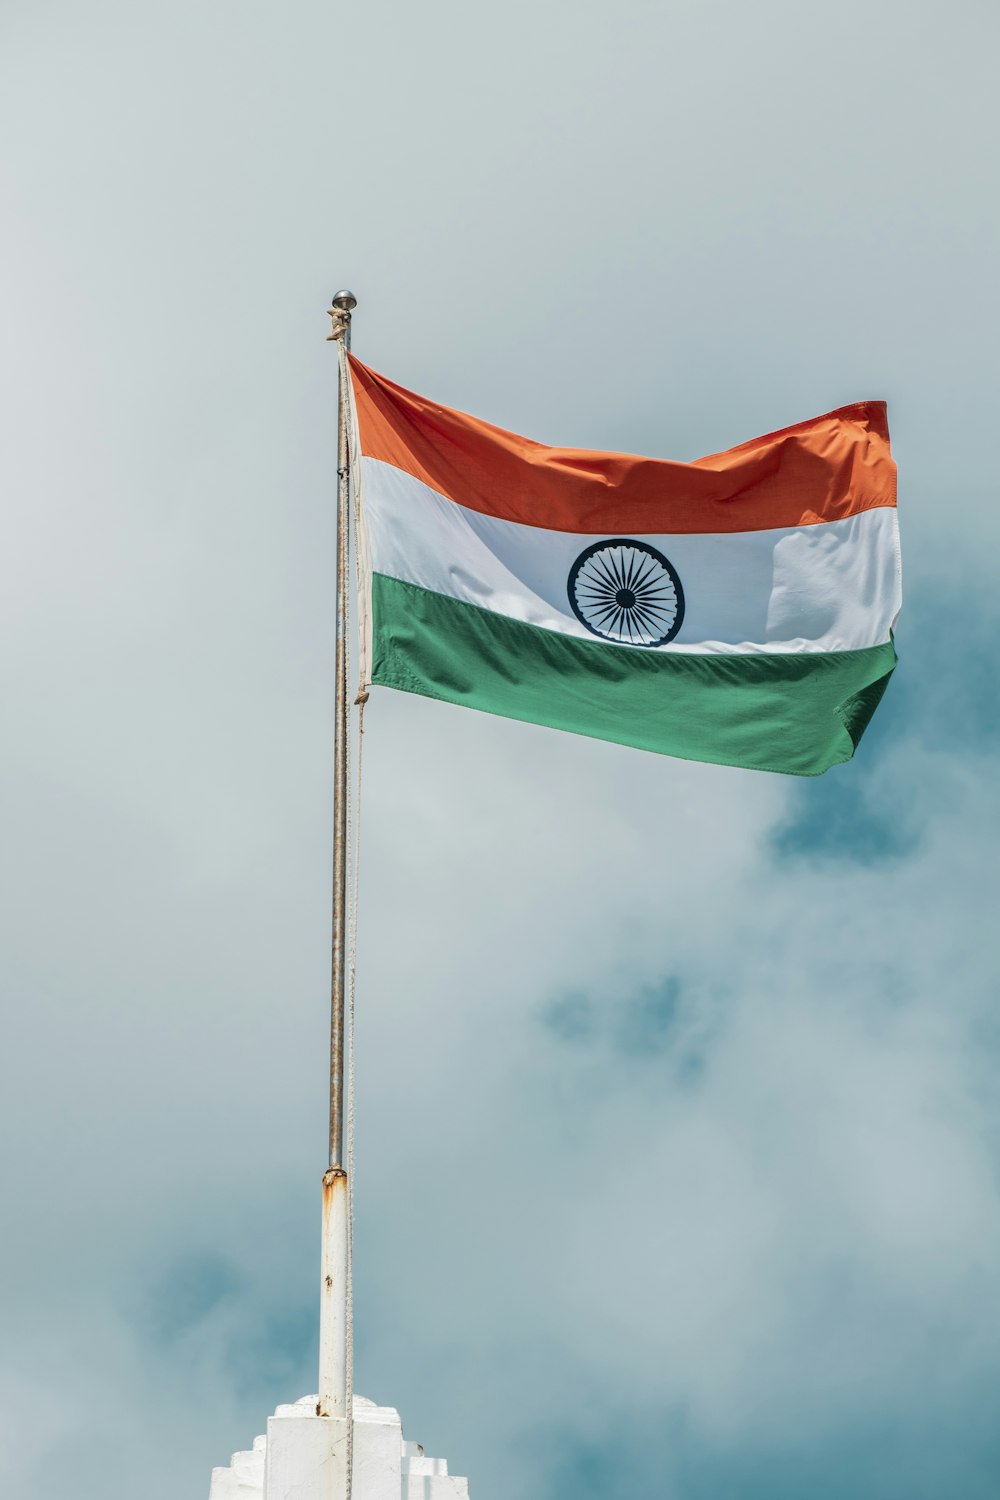 the indian flag is flying high in the sky